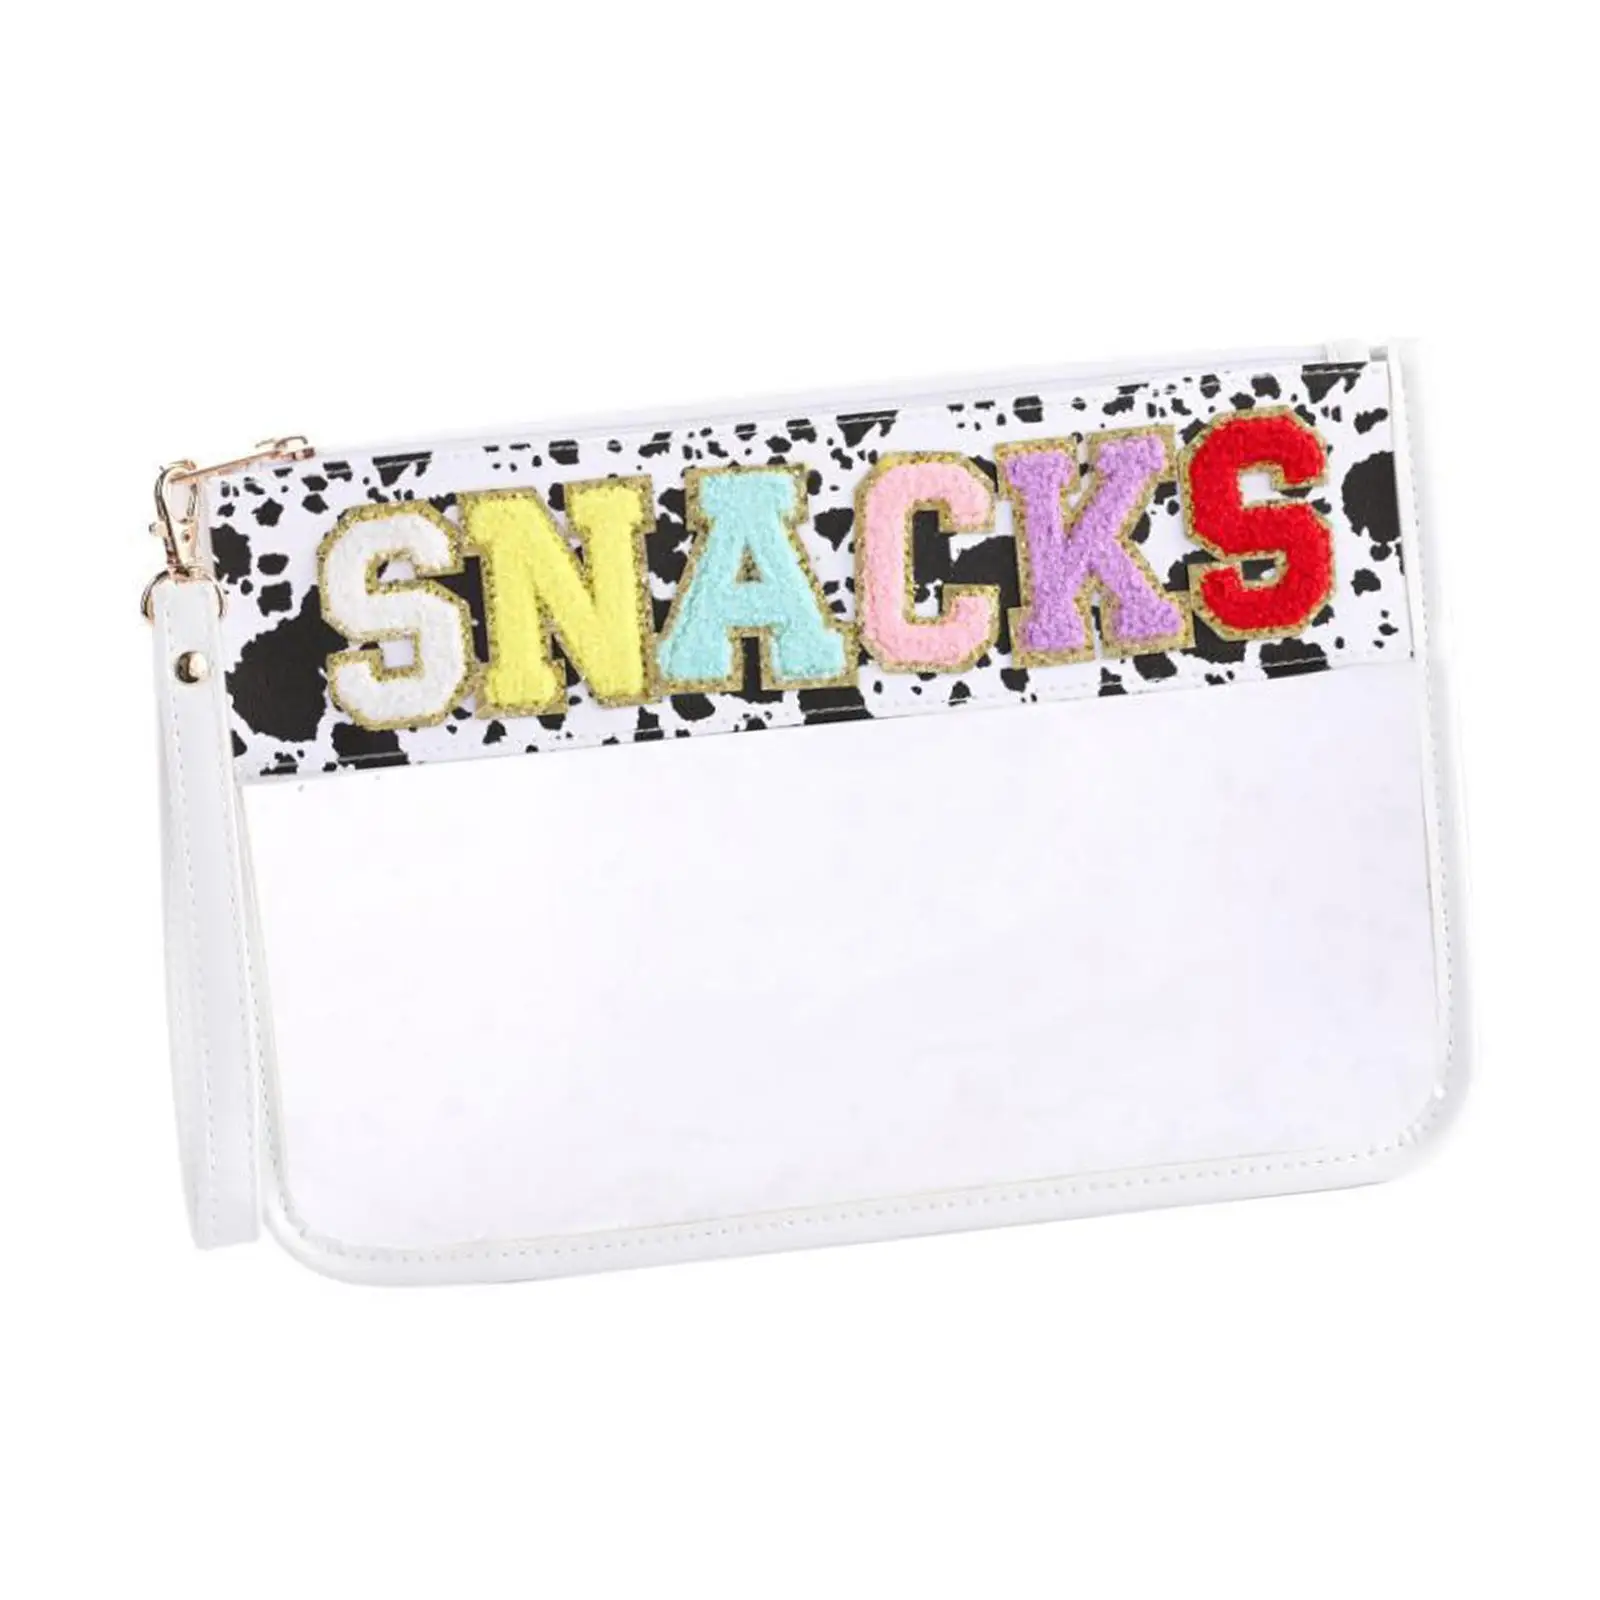 Travel Toiletry Bag Multifunctional Holder Lightweight Travel Bag Reusable Pouch Snack Bag Bathroom Accessories Clear Makeup Bag